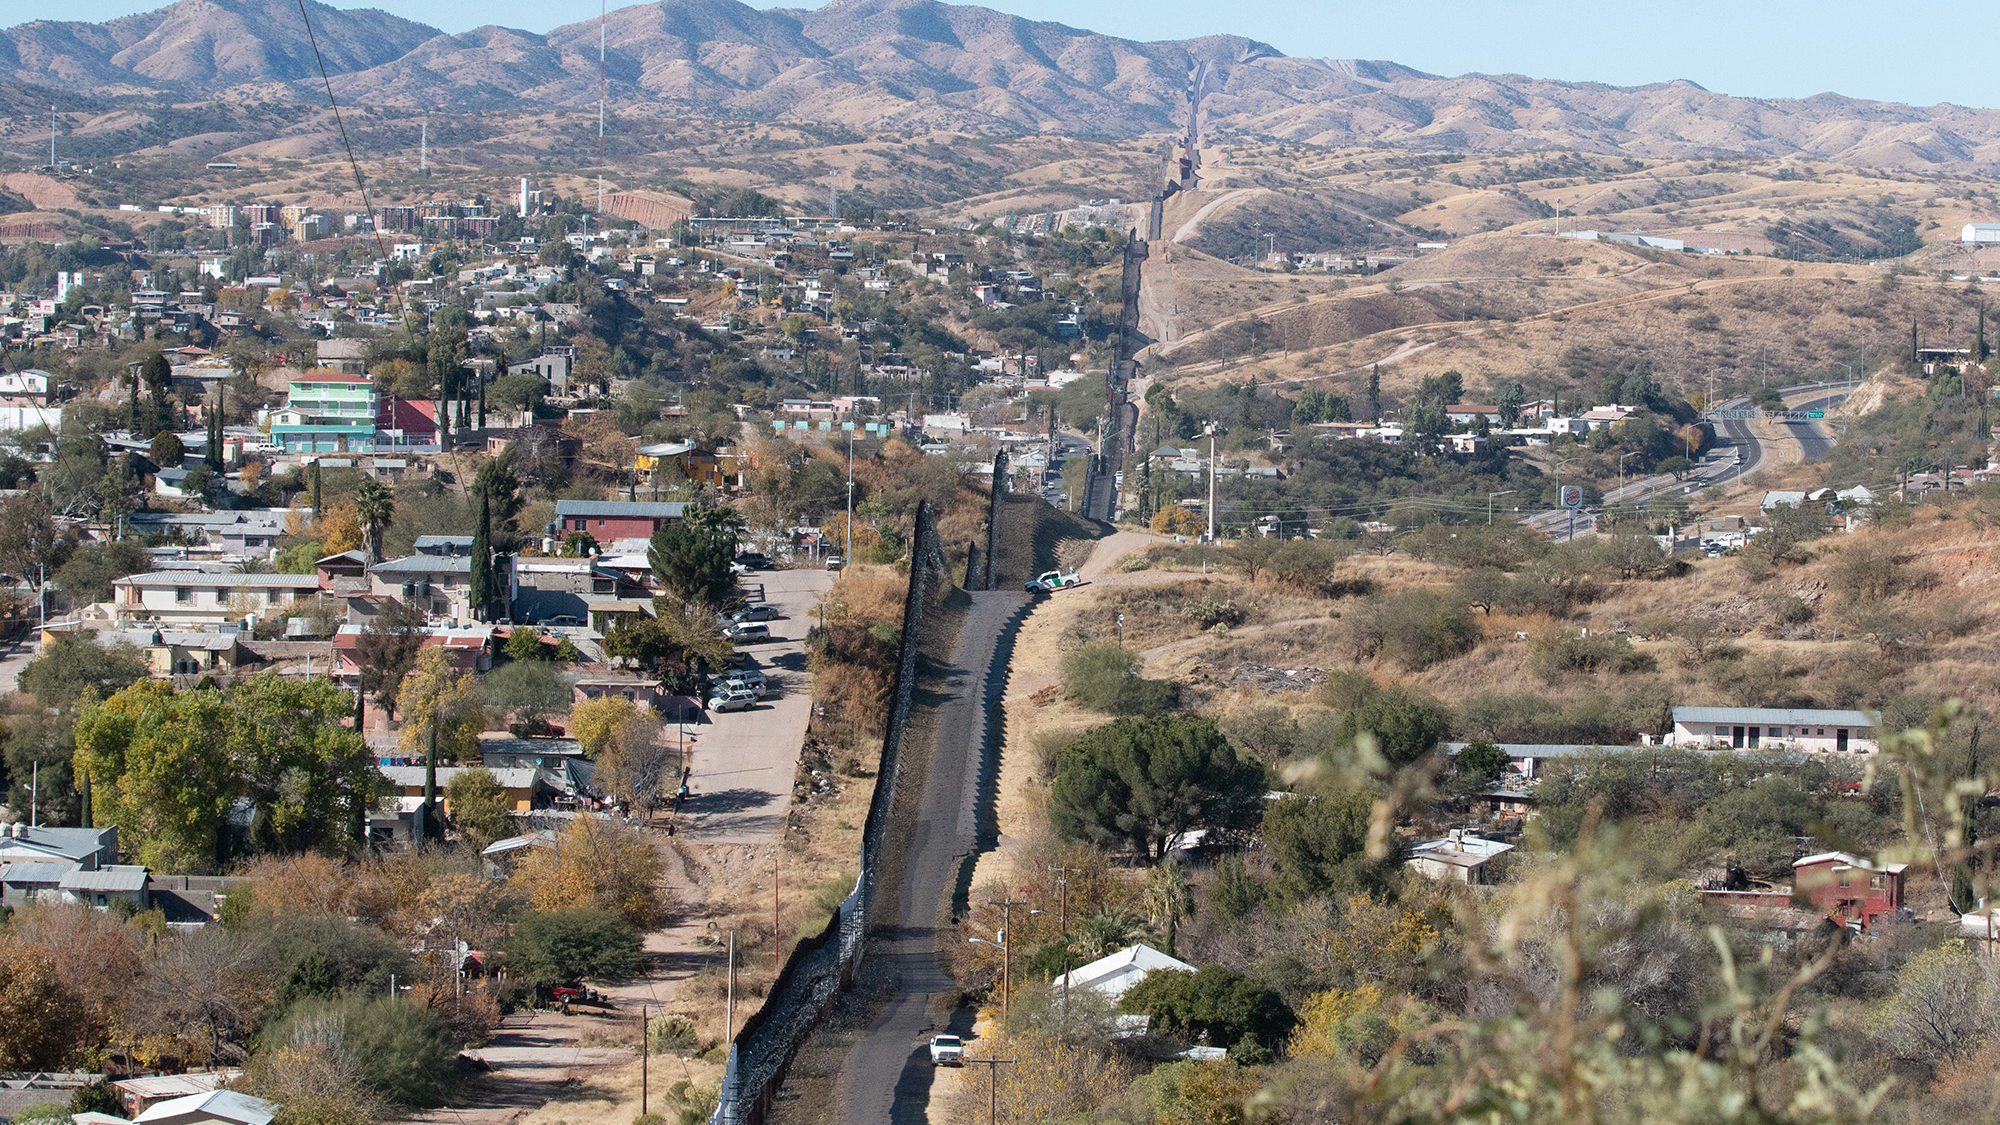 The city of Nogales, Sonora, Mexico sits just across the border fence from Nogales, Arizona,. It is...